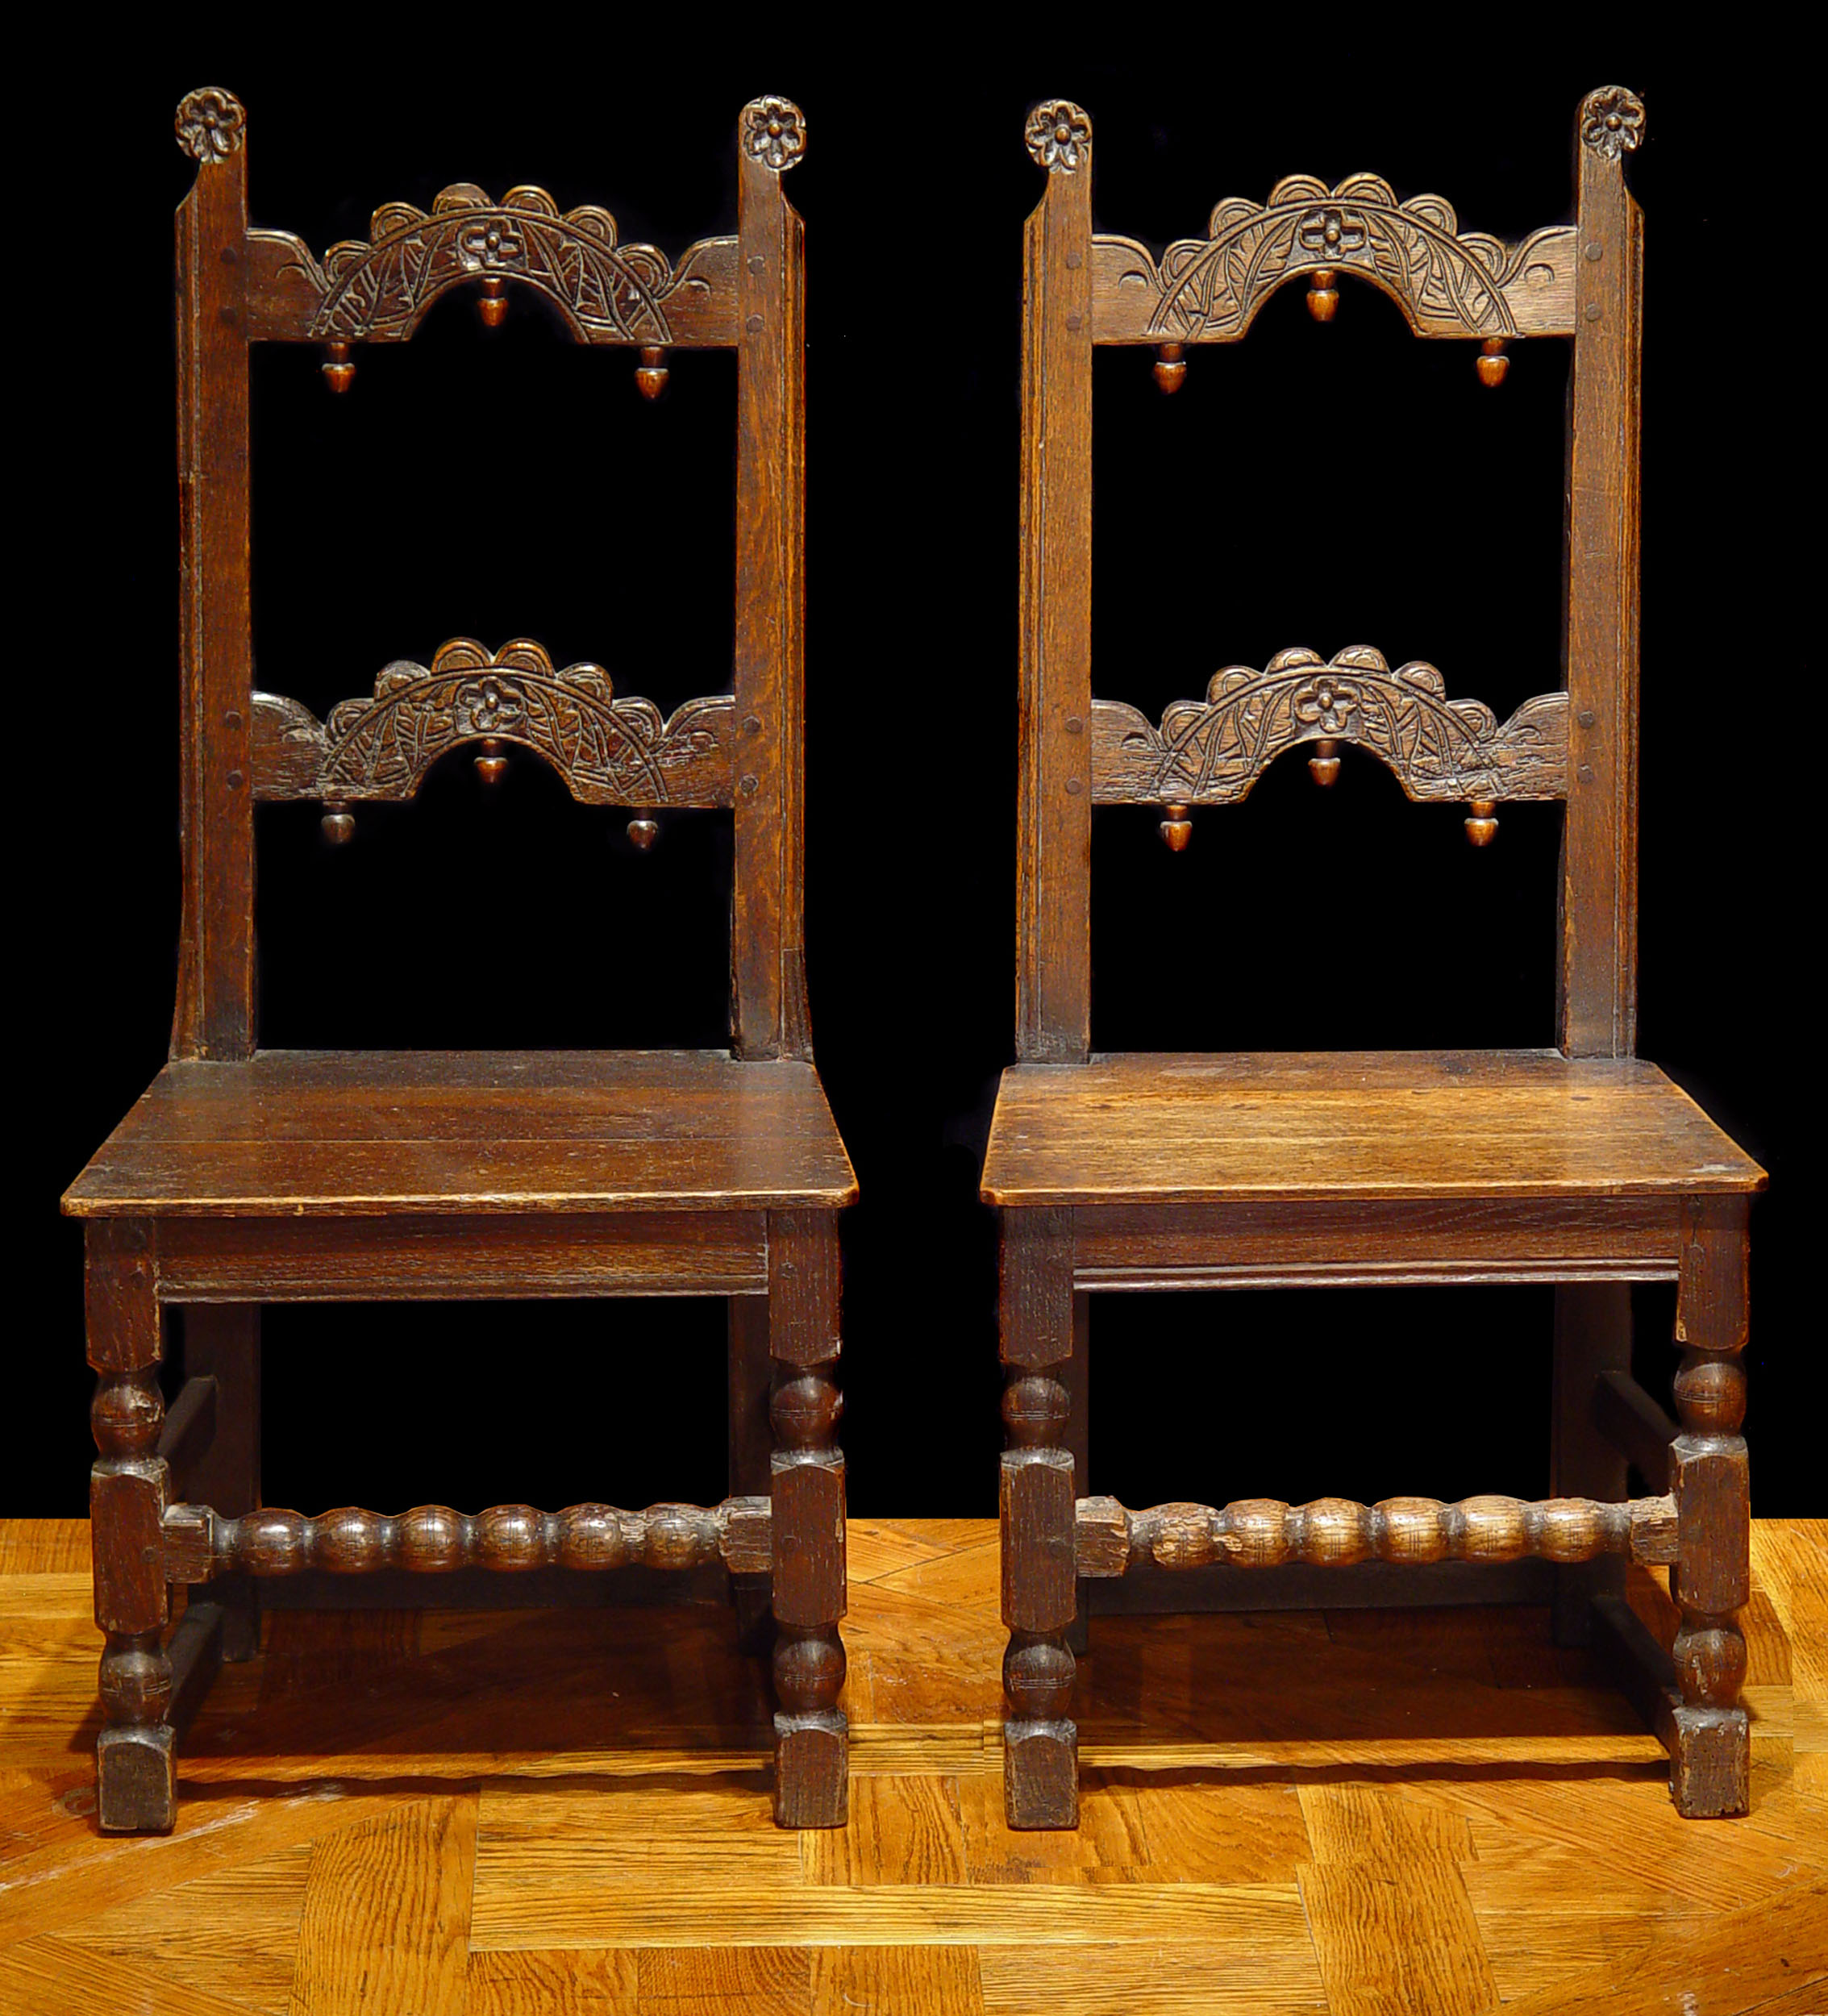 A Rare Pair of 17th Century Oak Hall Chairs